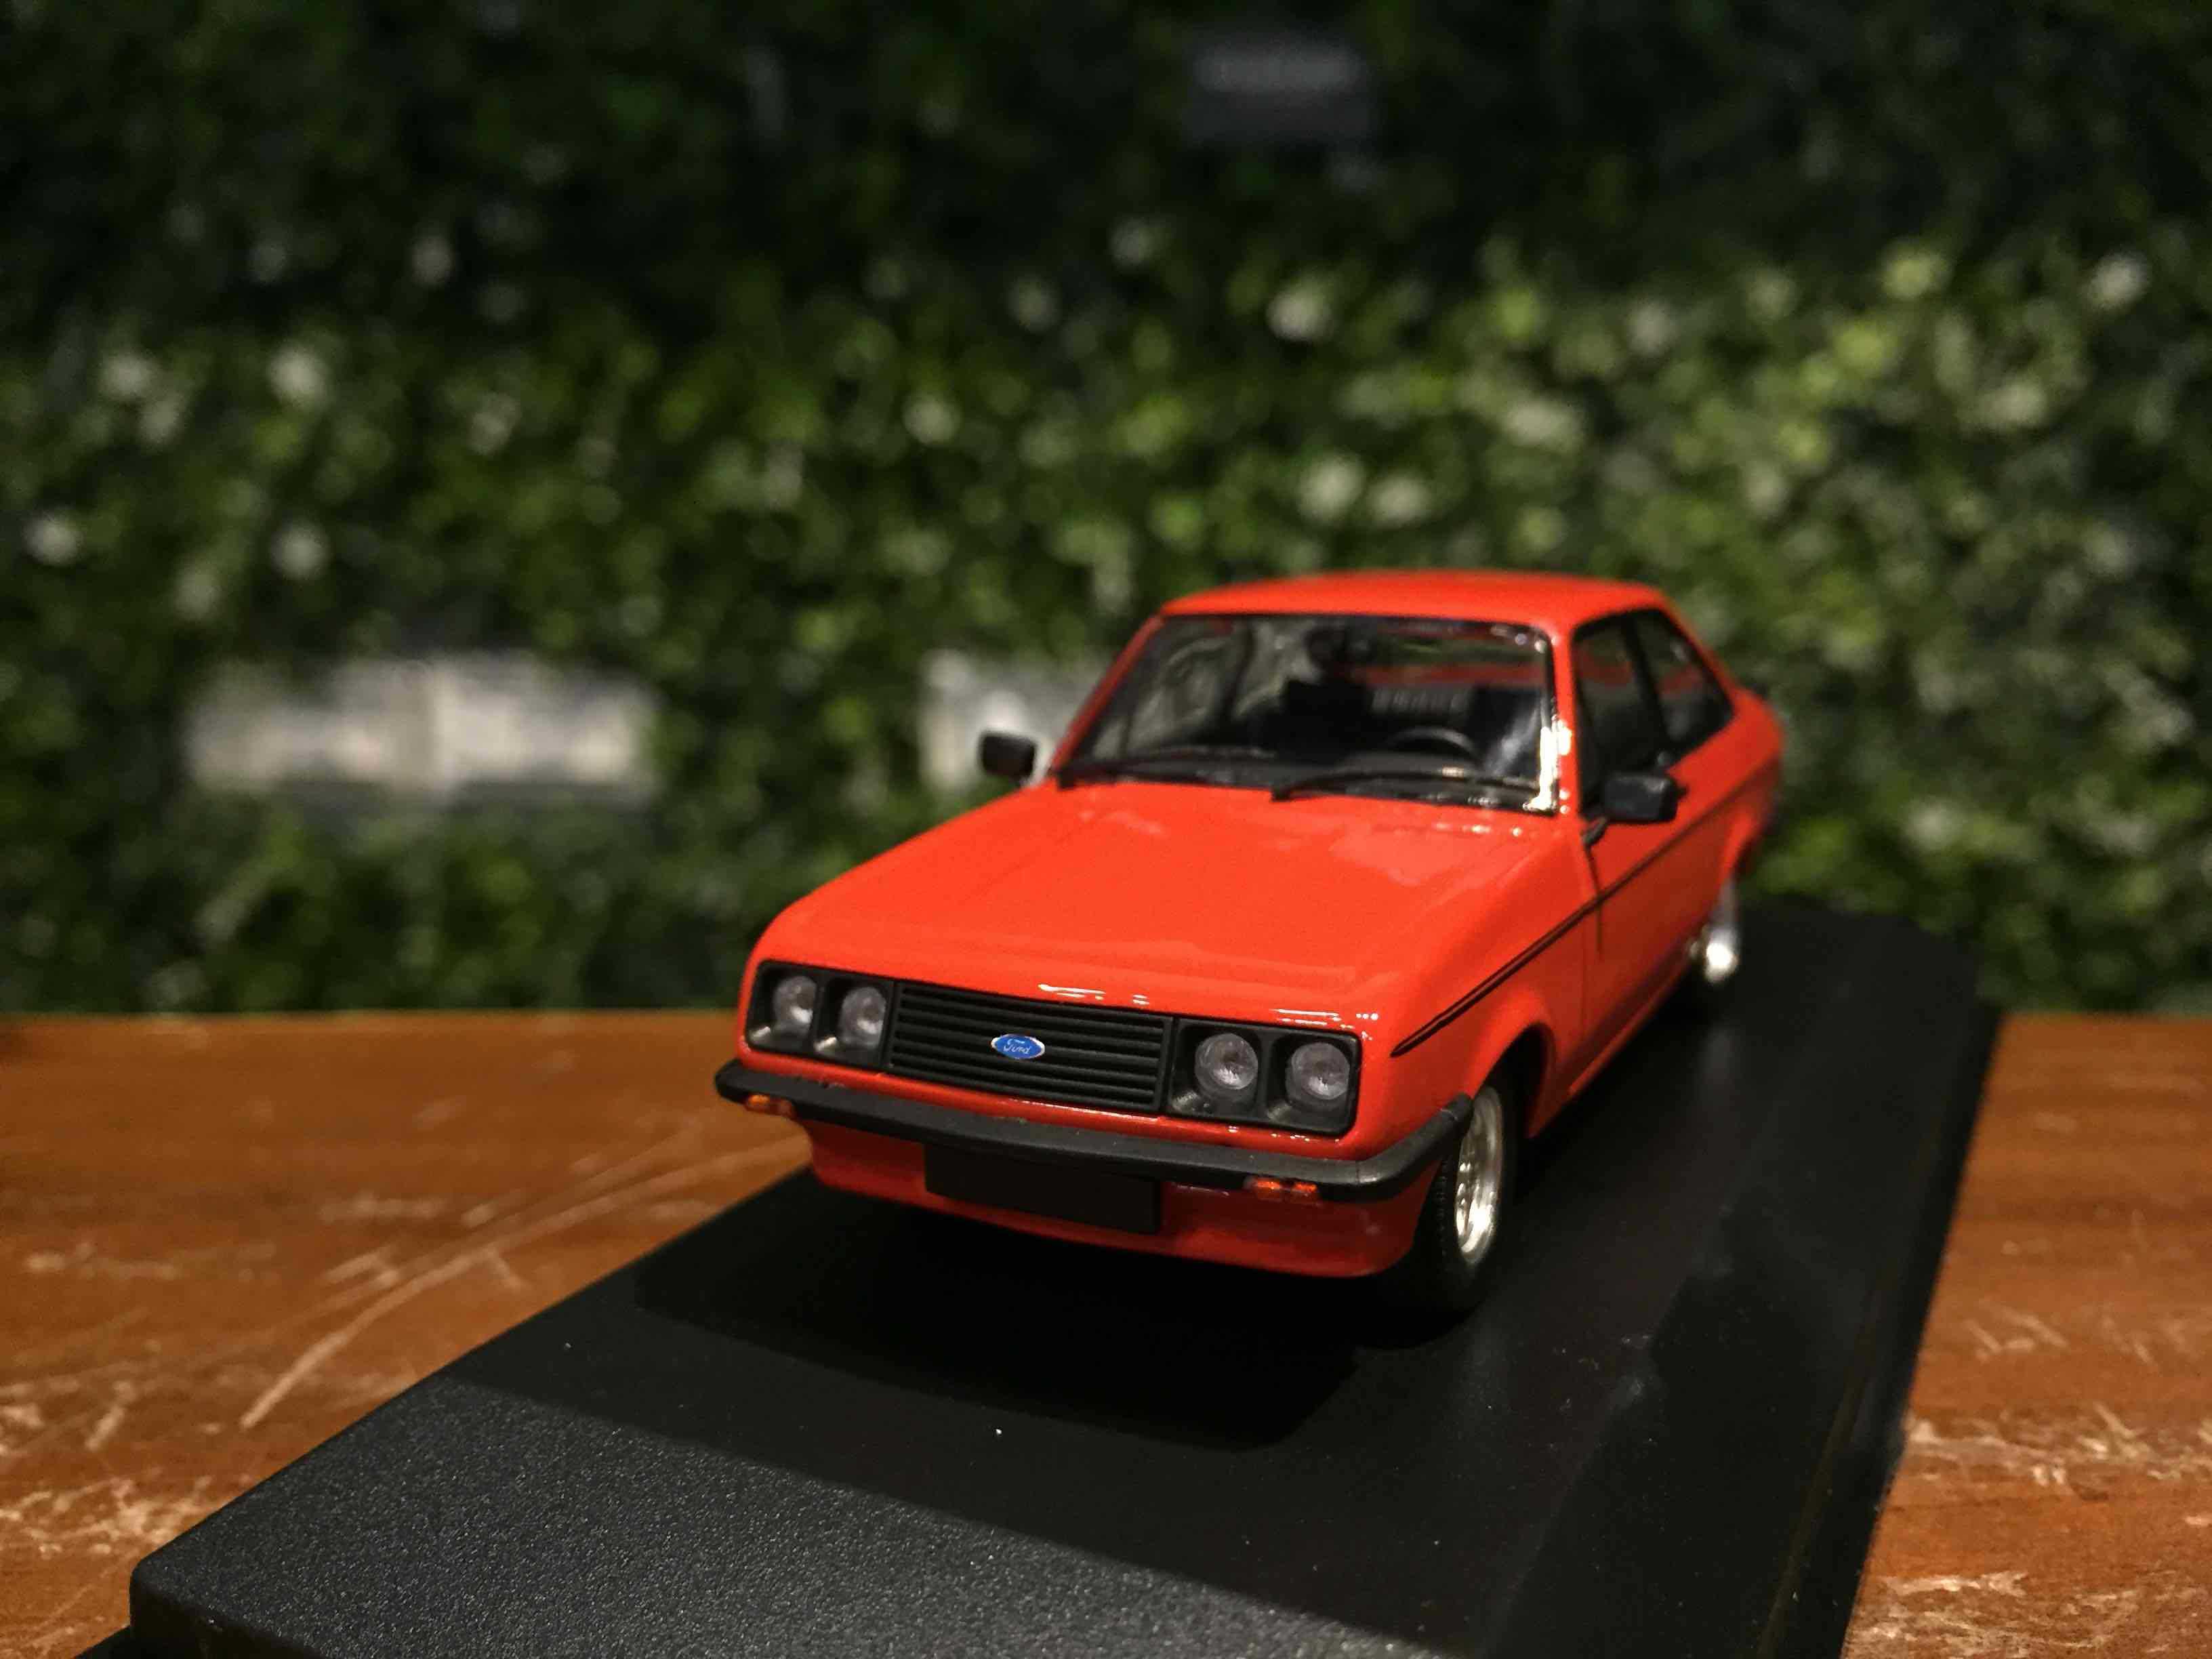 1/43 Minichamps Ford Escort RS2000 1976 Red 940084301【MGM】